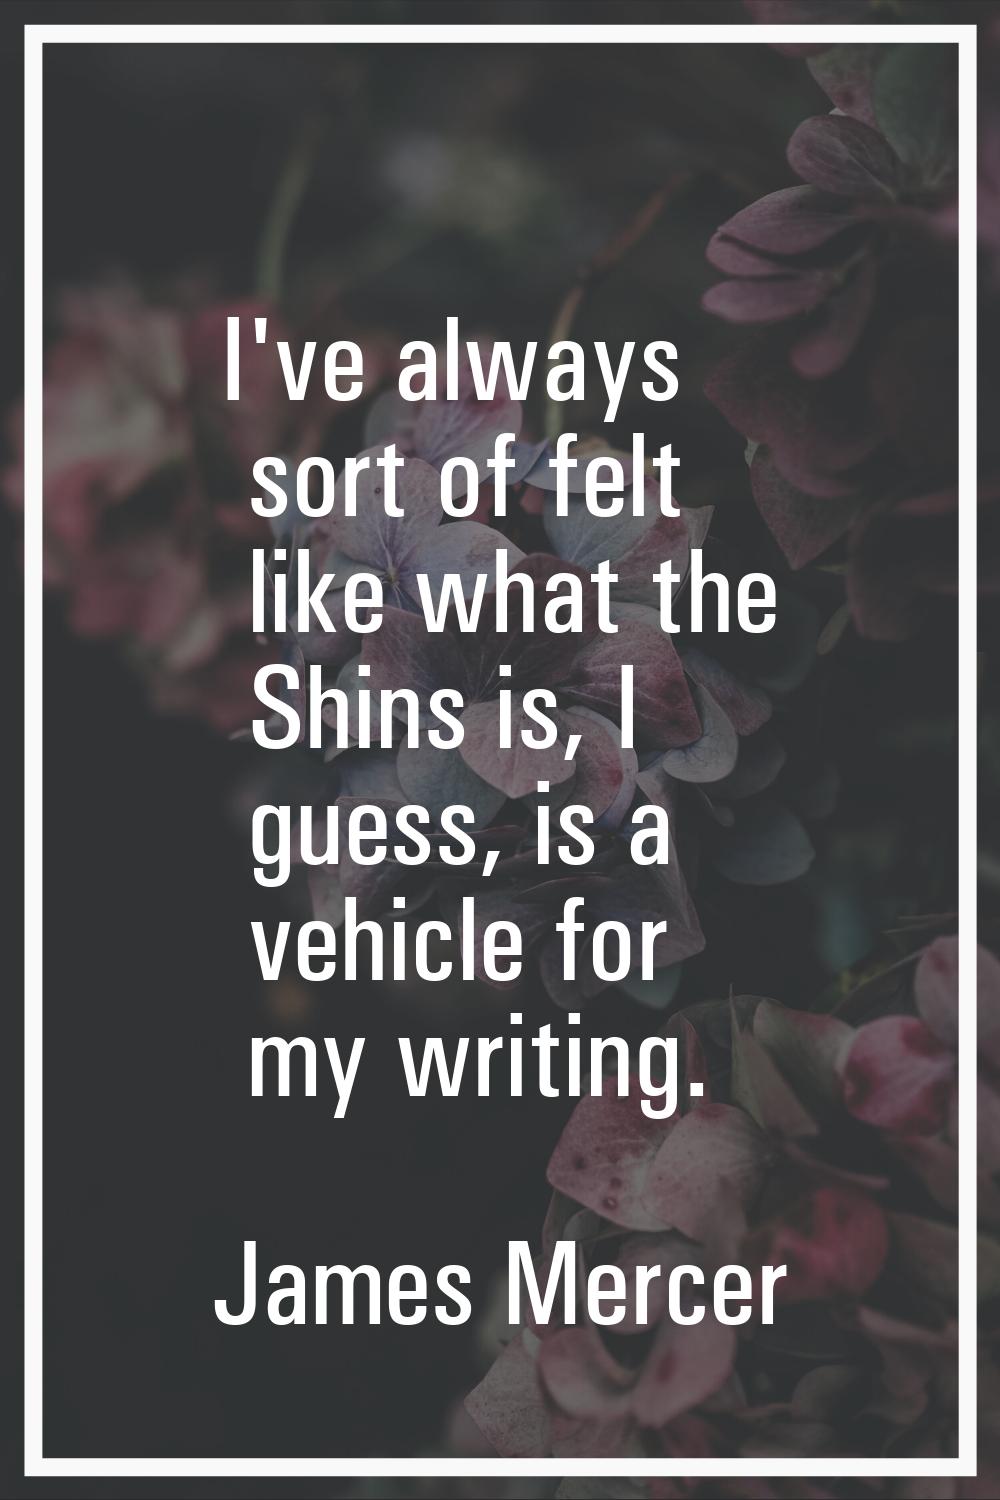 I've always sort of felt like what the Shins is, I guess, is a vehicle for my writing.